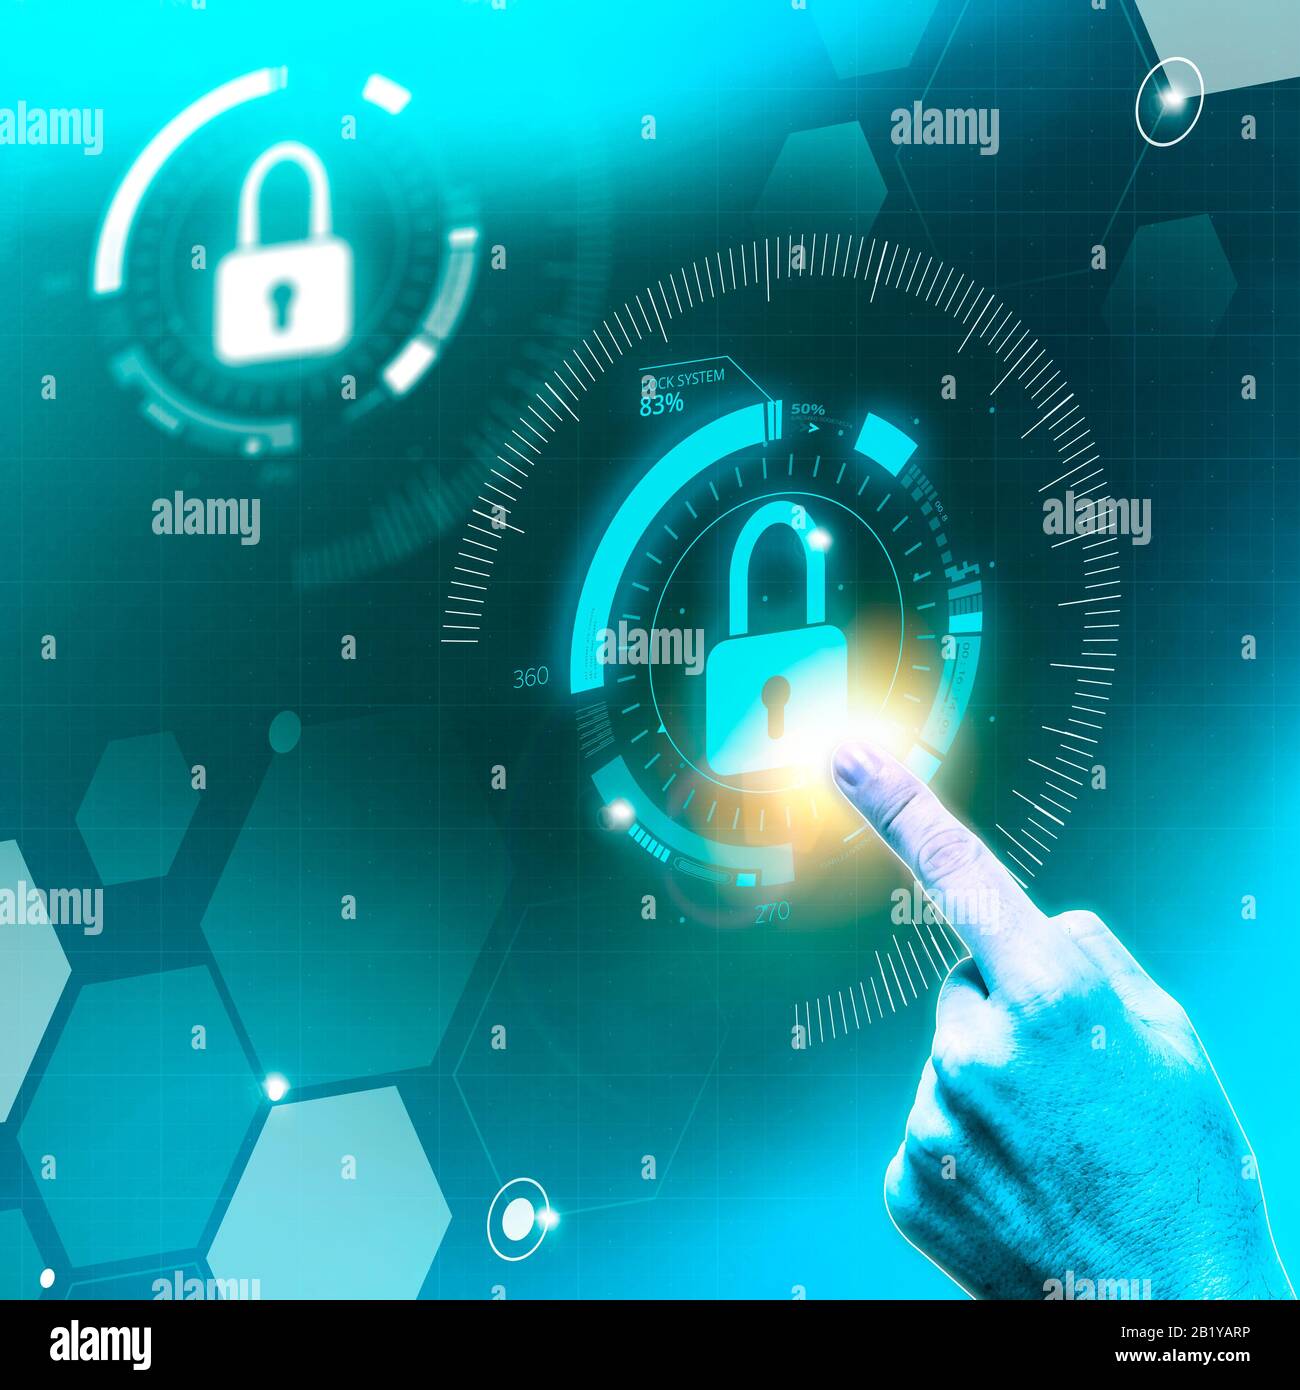 Finger clicking on a display with a lock icon.  HUD display showing stages of hacking in progress: exploiting vulnerability, Granted Access Stock Photo